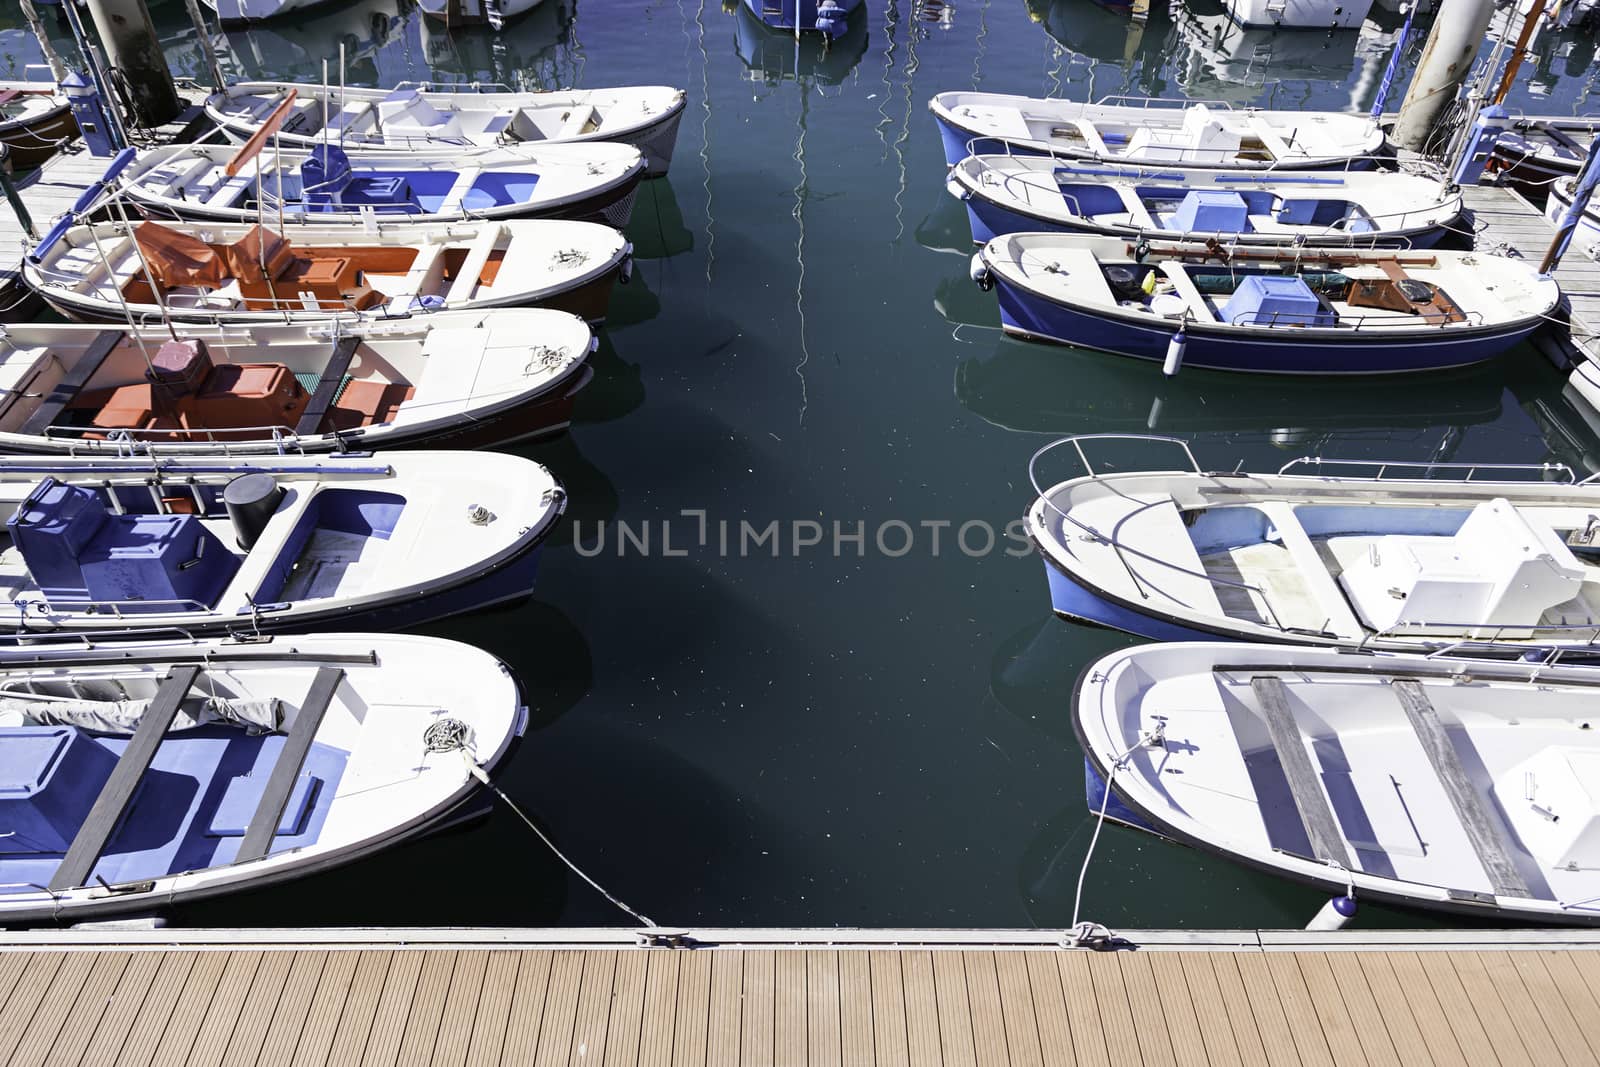 Boats moored at a marine dock, detail of recreational boats on a dock, fishing and fun, sea transport